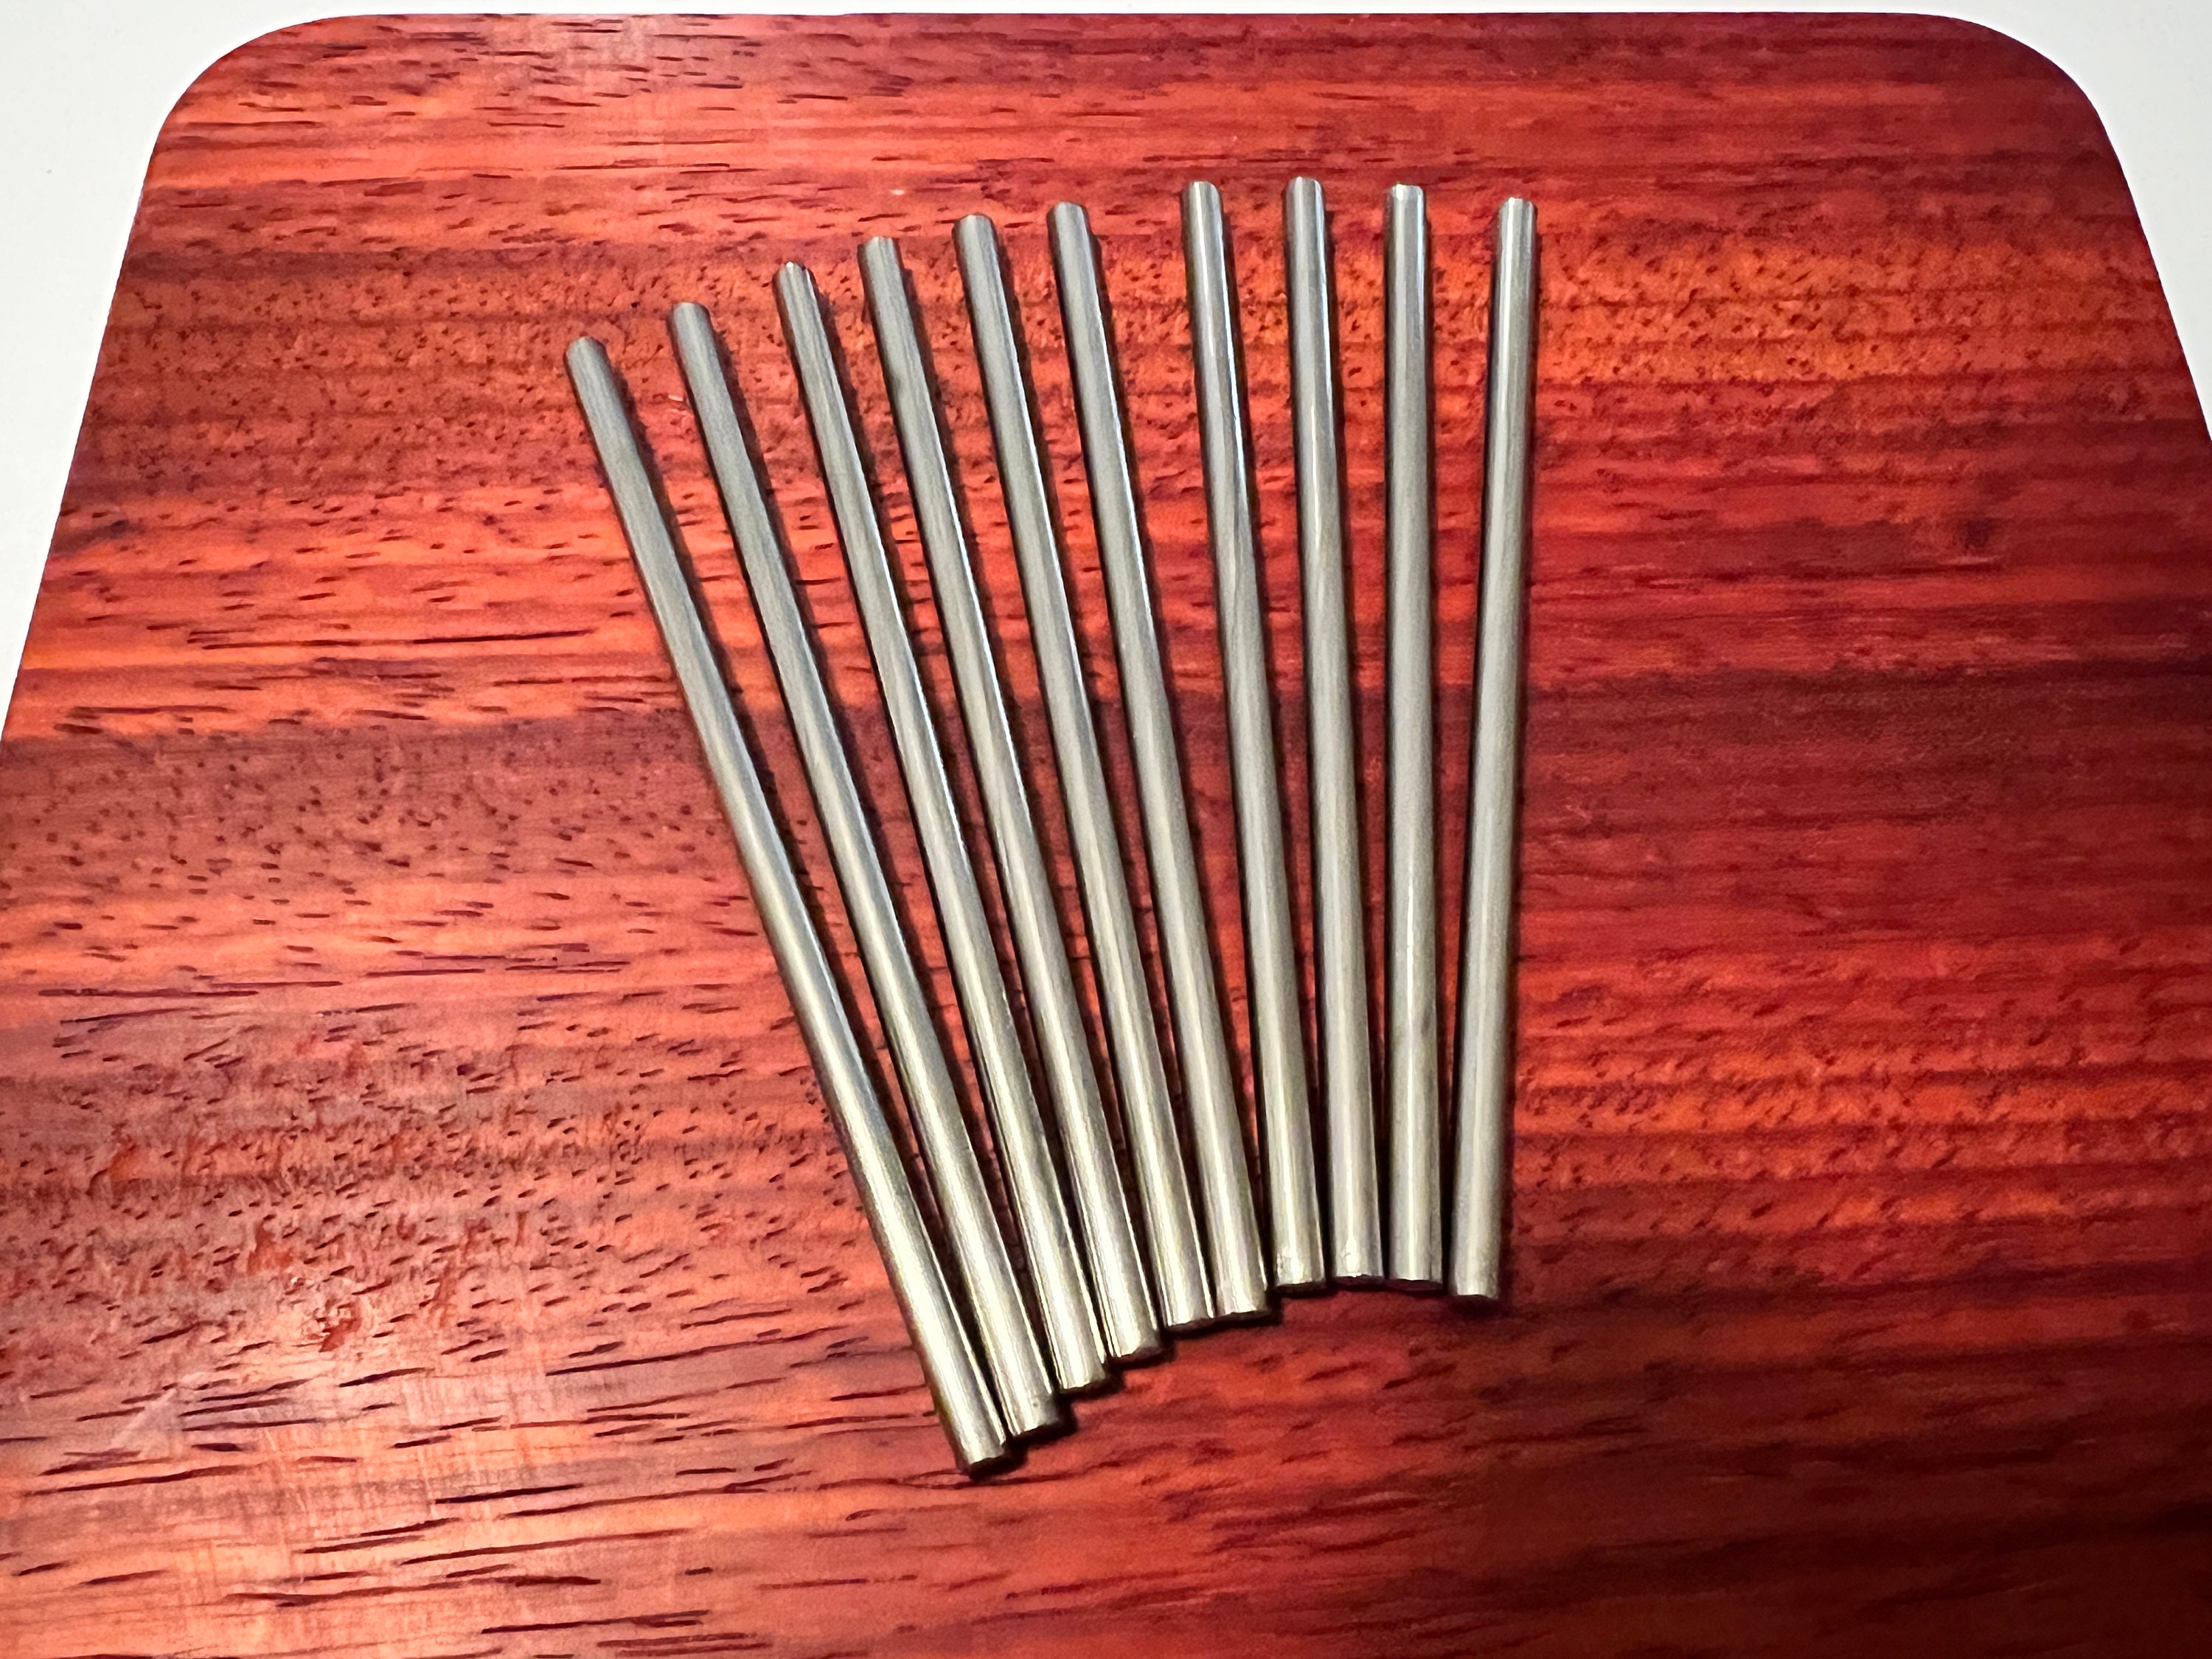 Olikraft Stainless Steel Blocking Pins (6 inches) - 50 Pieces